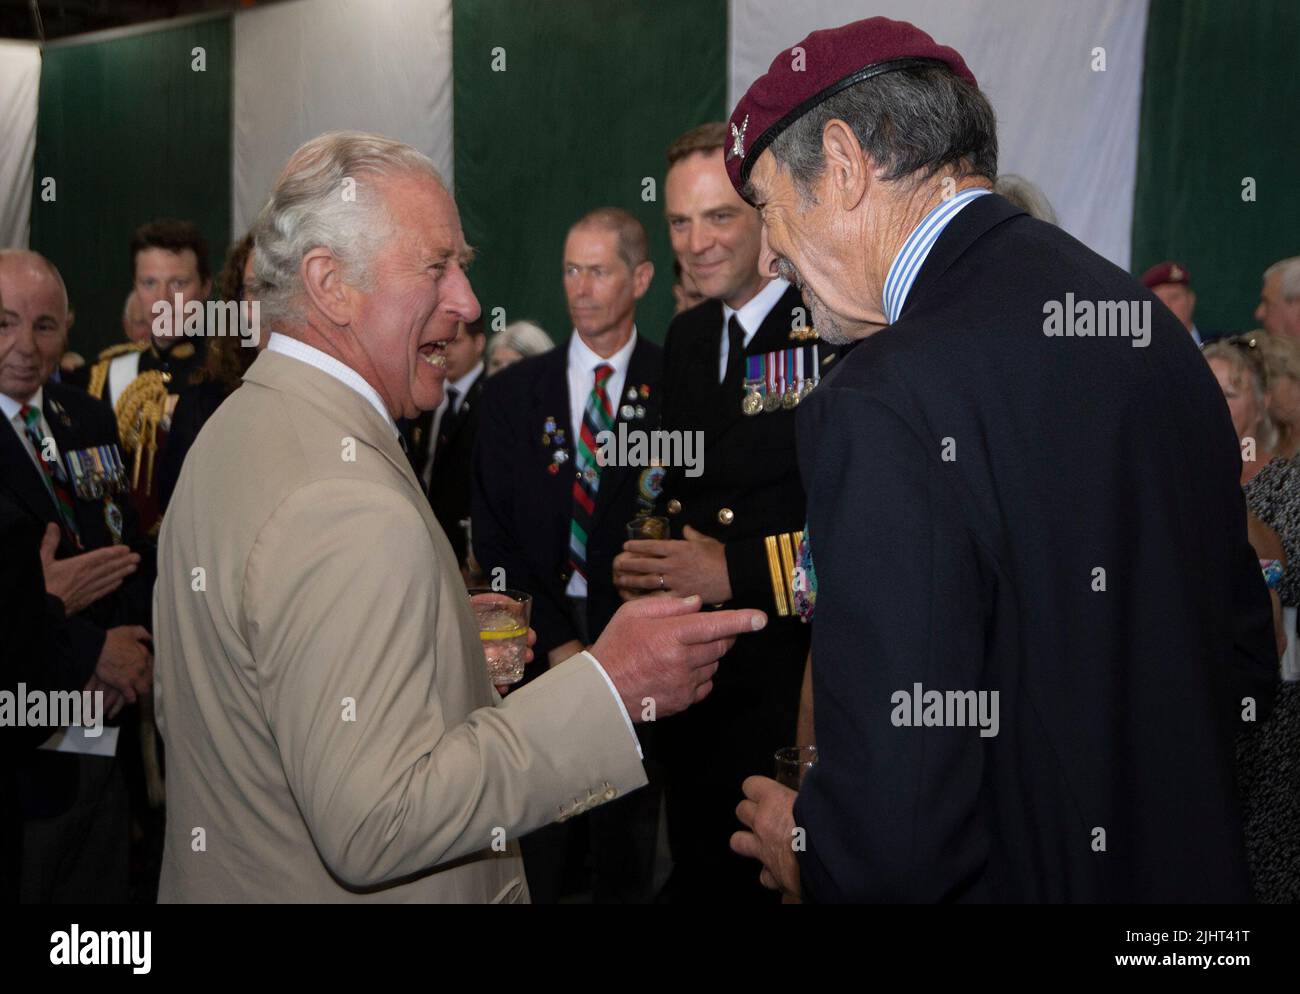 The Prince of Wales (left) talks to Falklands veteran Chris Jackson of C Company 2 Para during a reception to mark the 40th anniversary of the conflict on board the Royal Navy aircraft carrier HMS Queen Elizabeth. Picture date: Wednesday July 20, 2022. Stock Photo